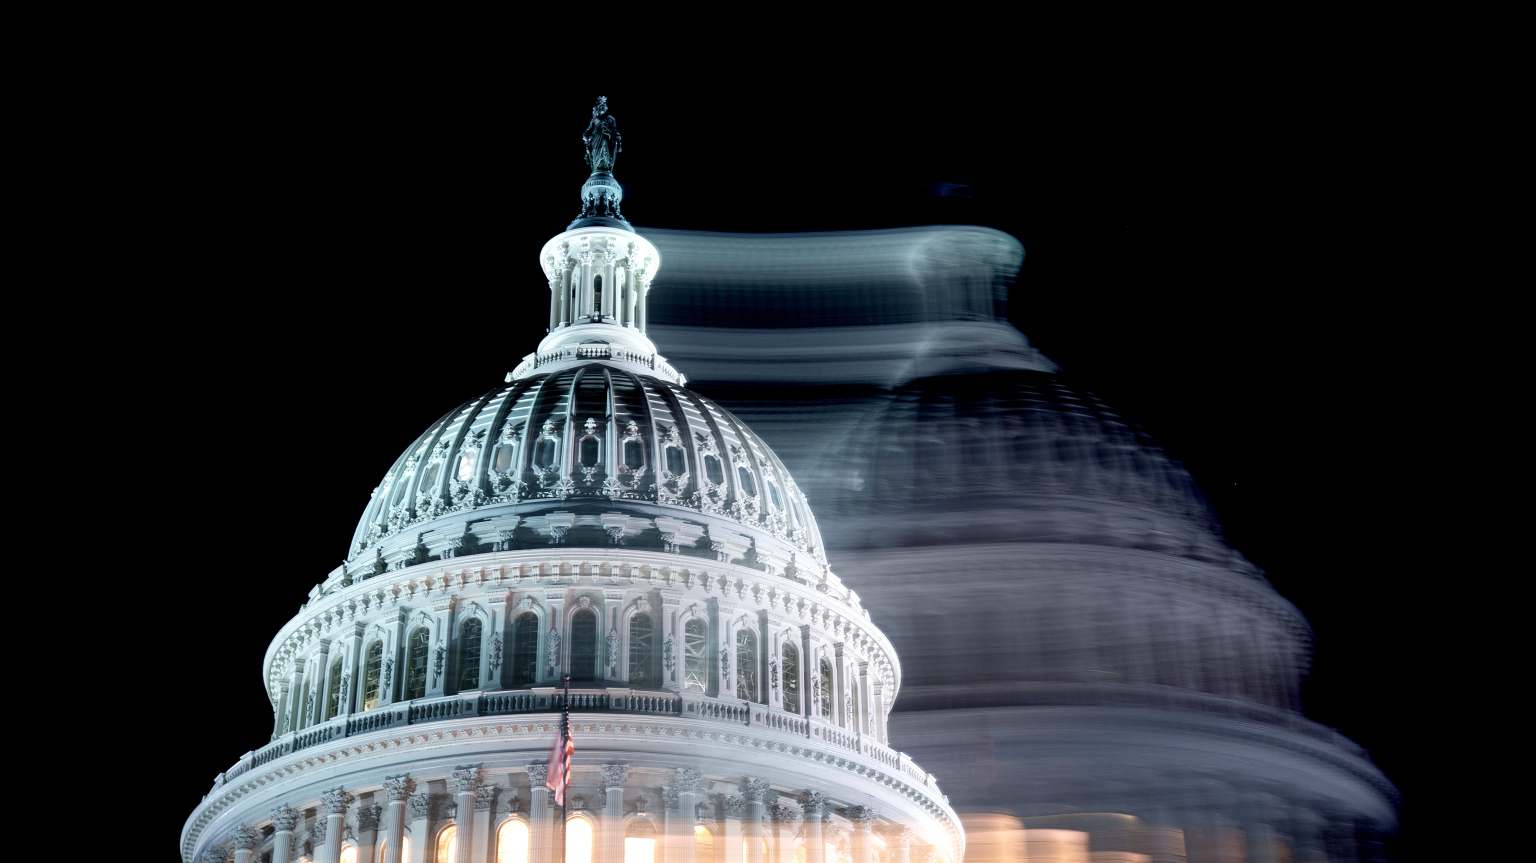 A photo of the U.S. capitol dome, blurred to look as if there are two of them.